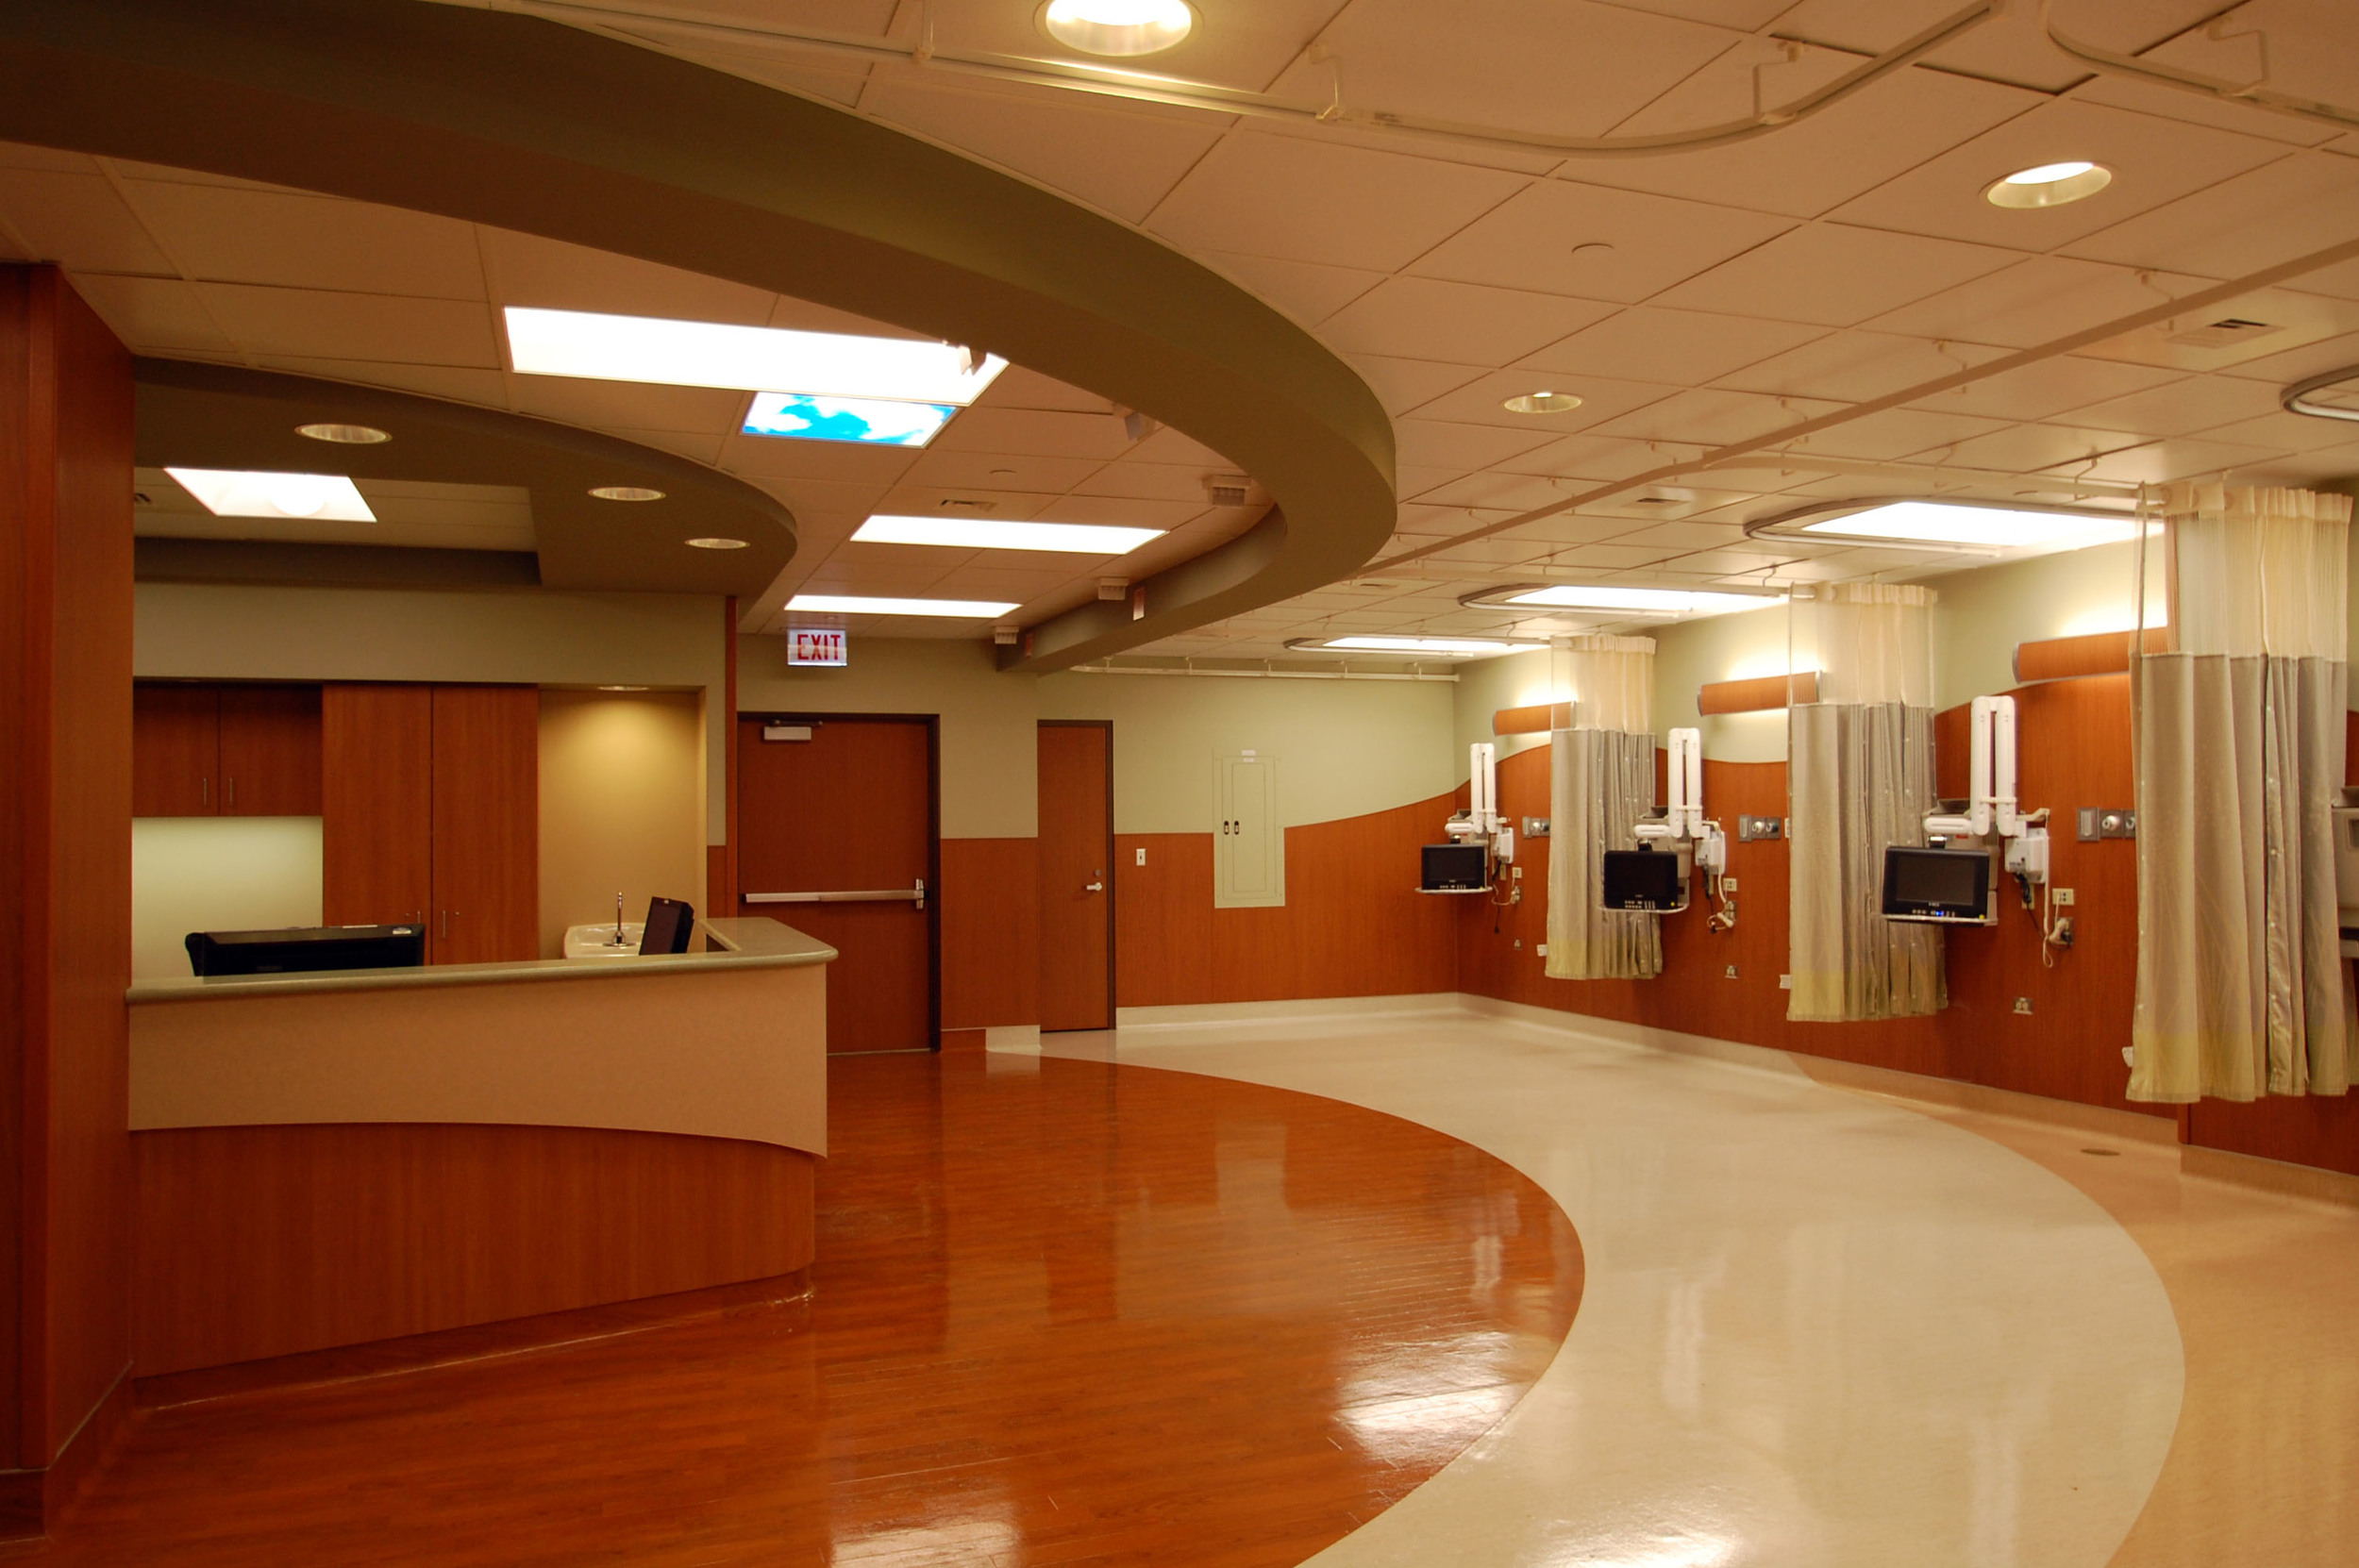   Health Care   Spaces for Healing 